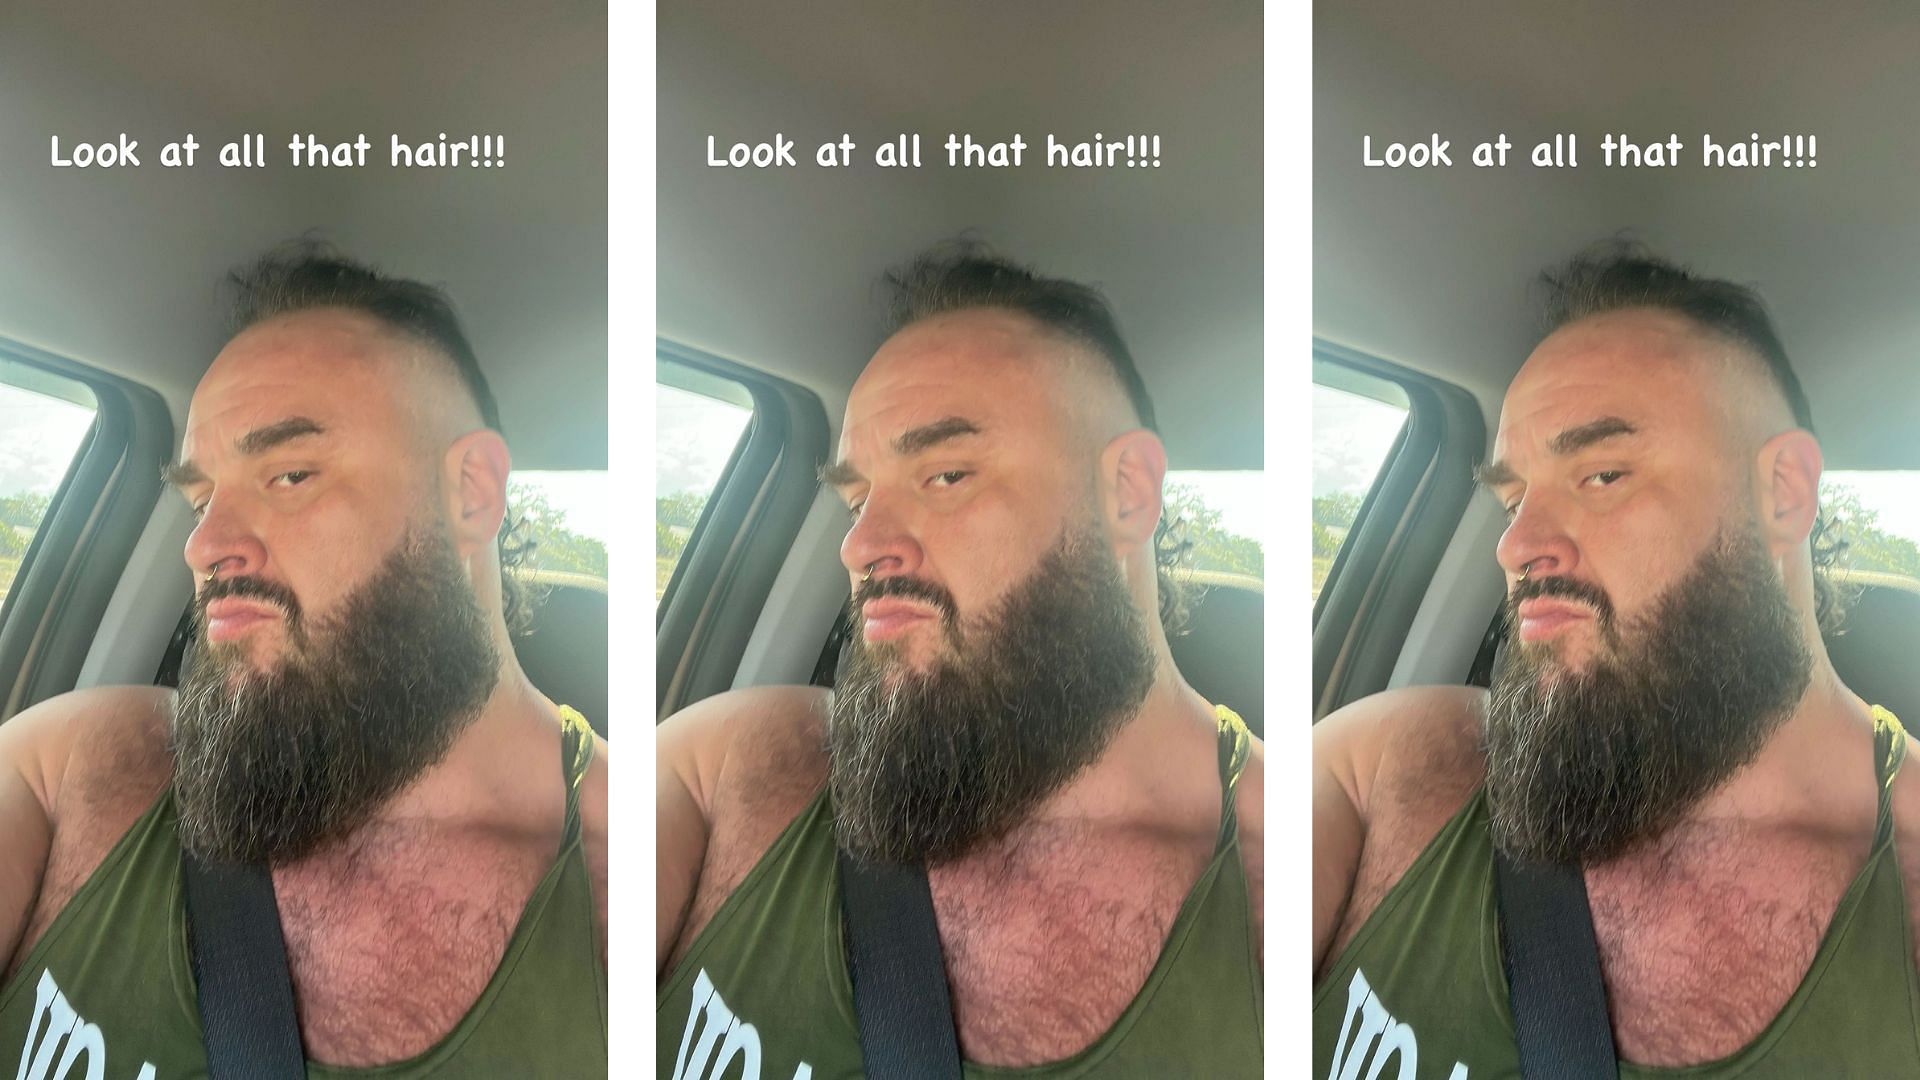 Strowman shows off his new hairstyle on Instagram.